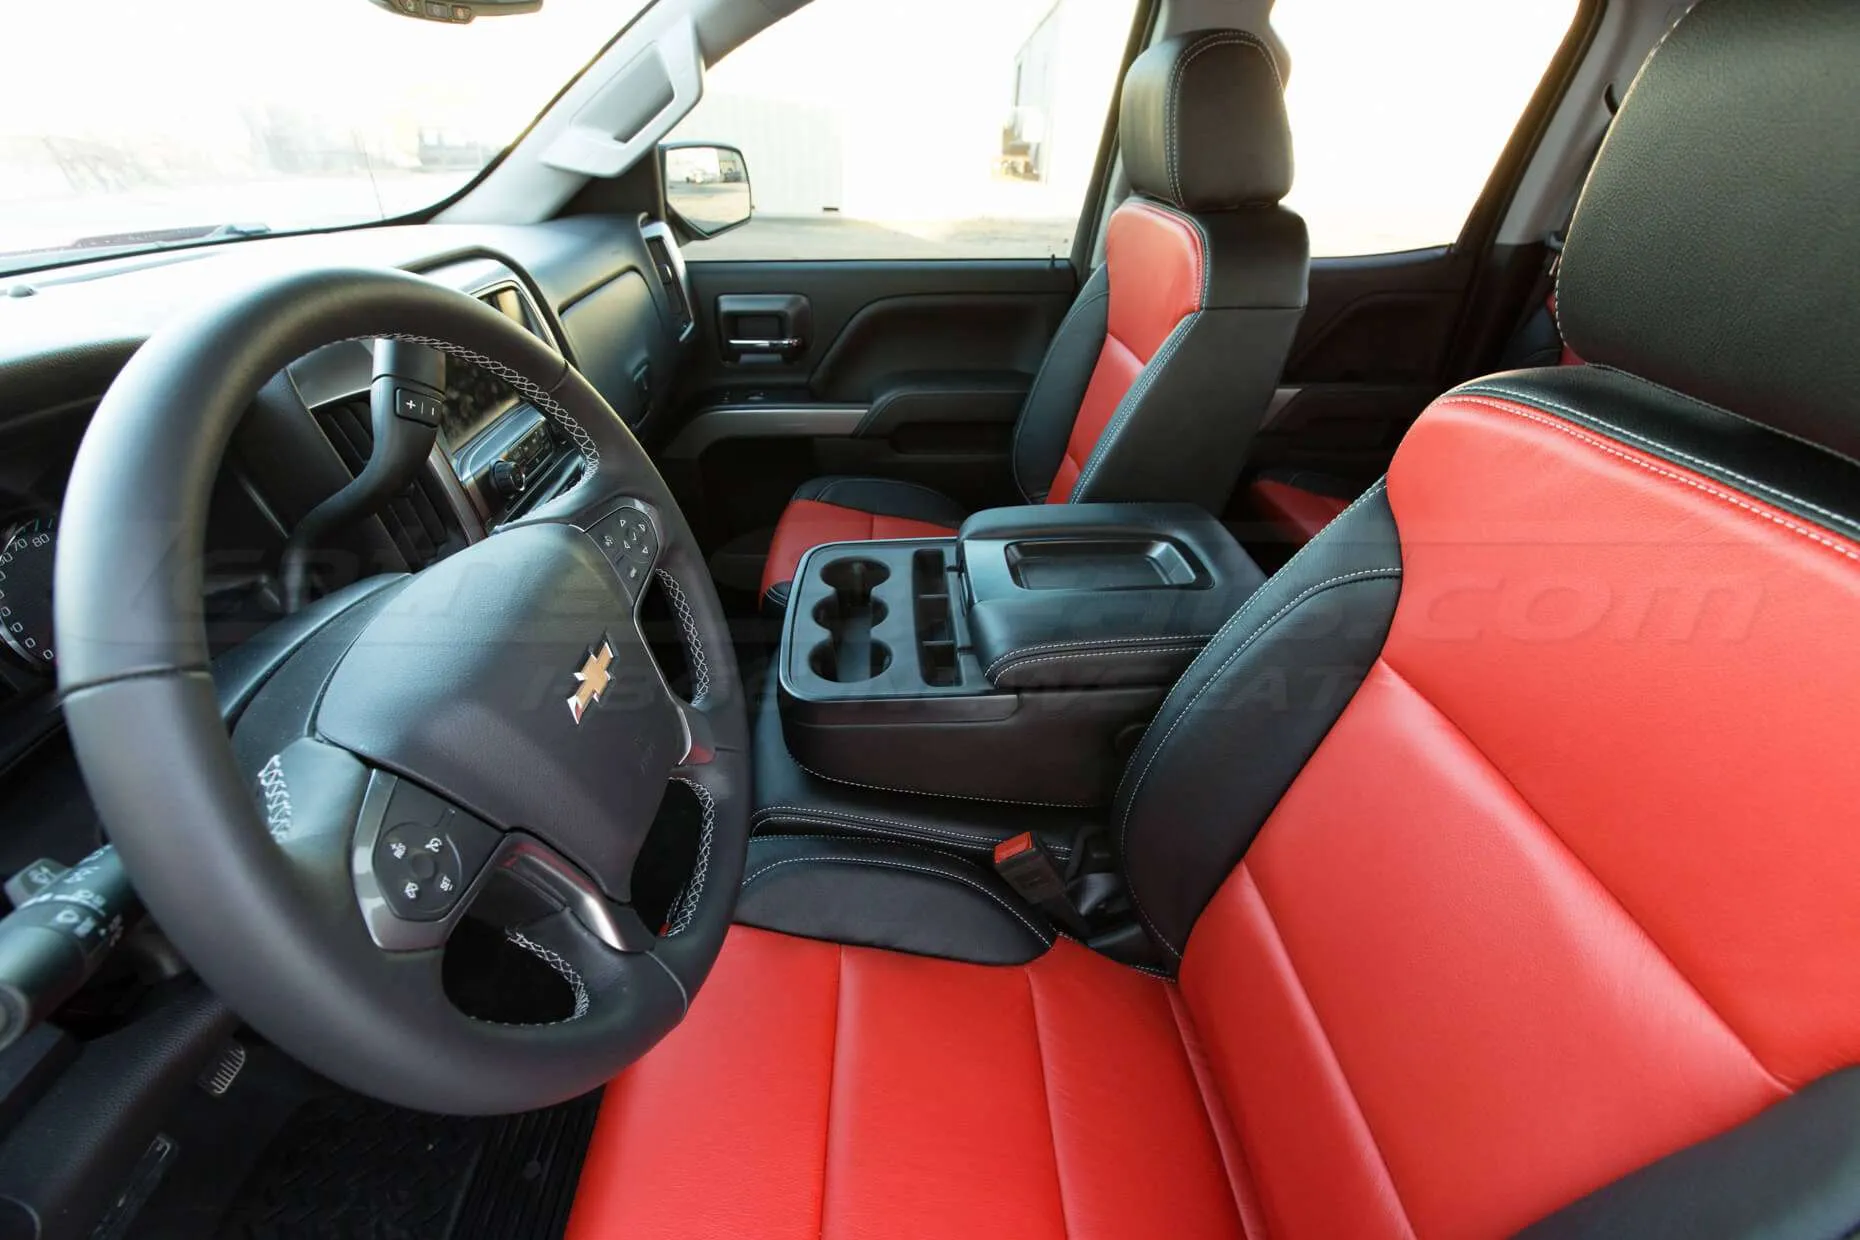 GMC Sierra leather upholstery kit - Black and Bright Red - Front seat side view